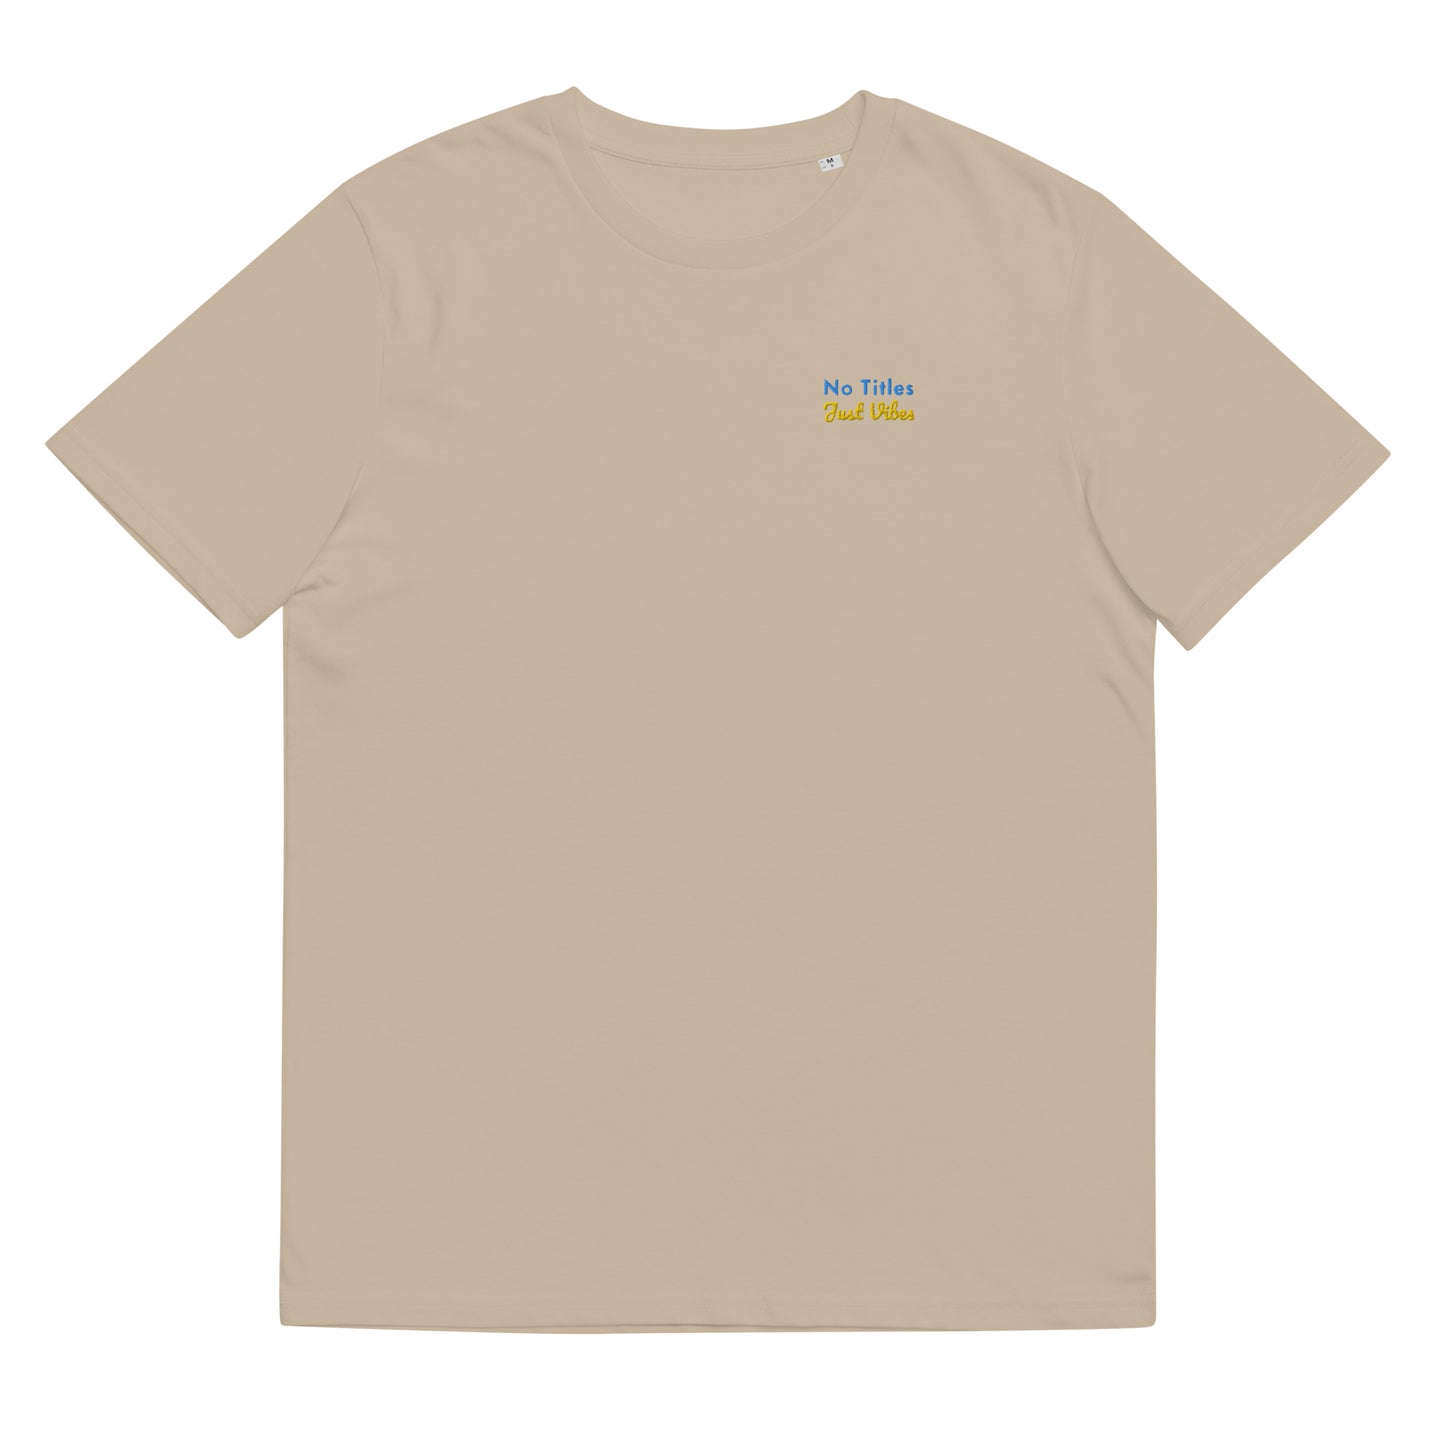 Organic Cotton T-shirt: No Titles, Just Vibes Embroidery